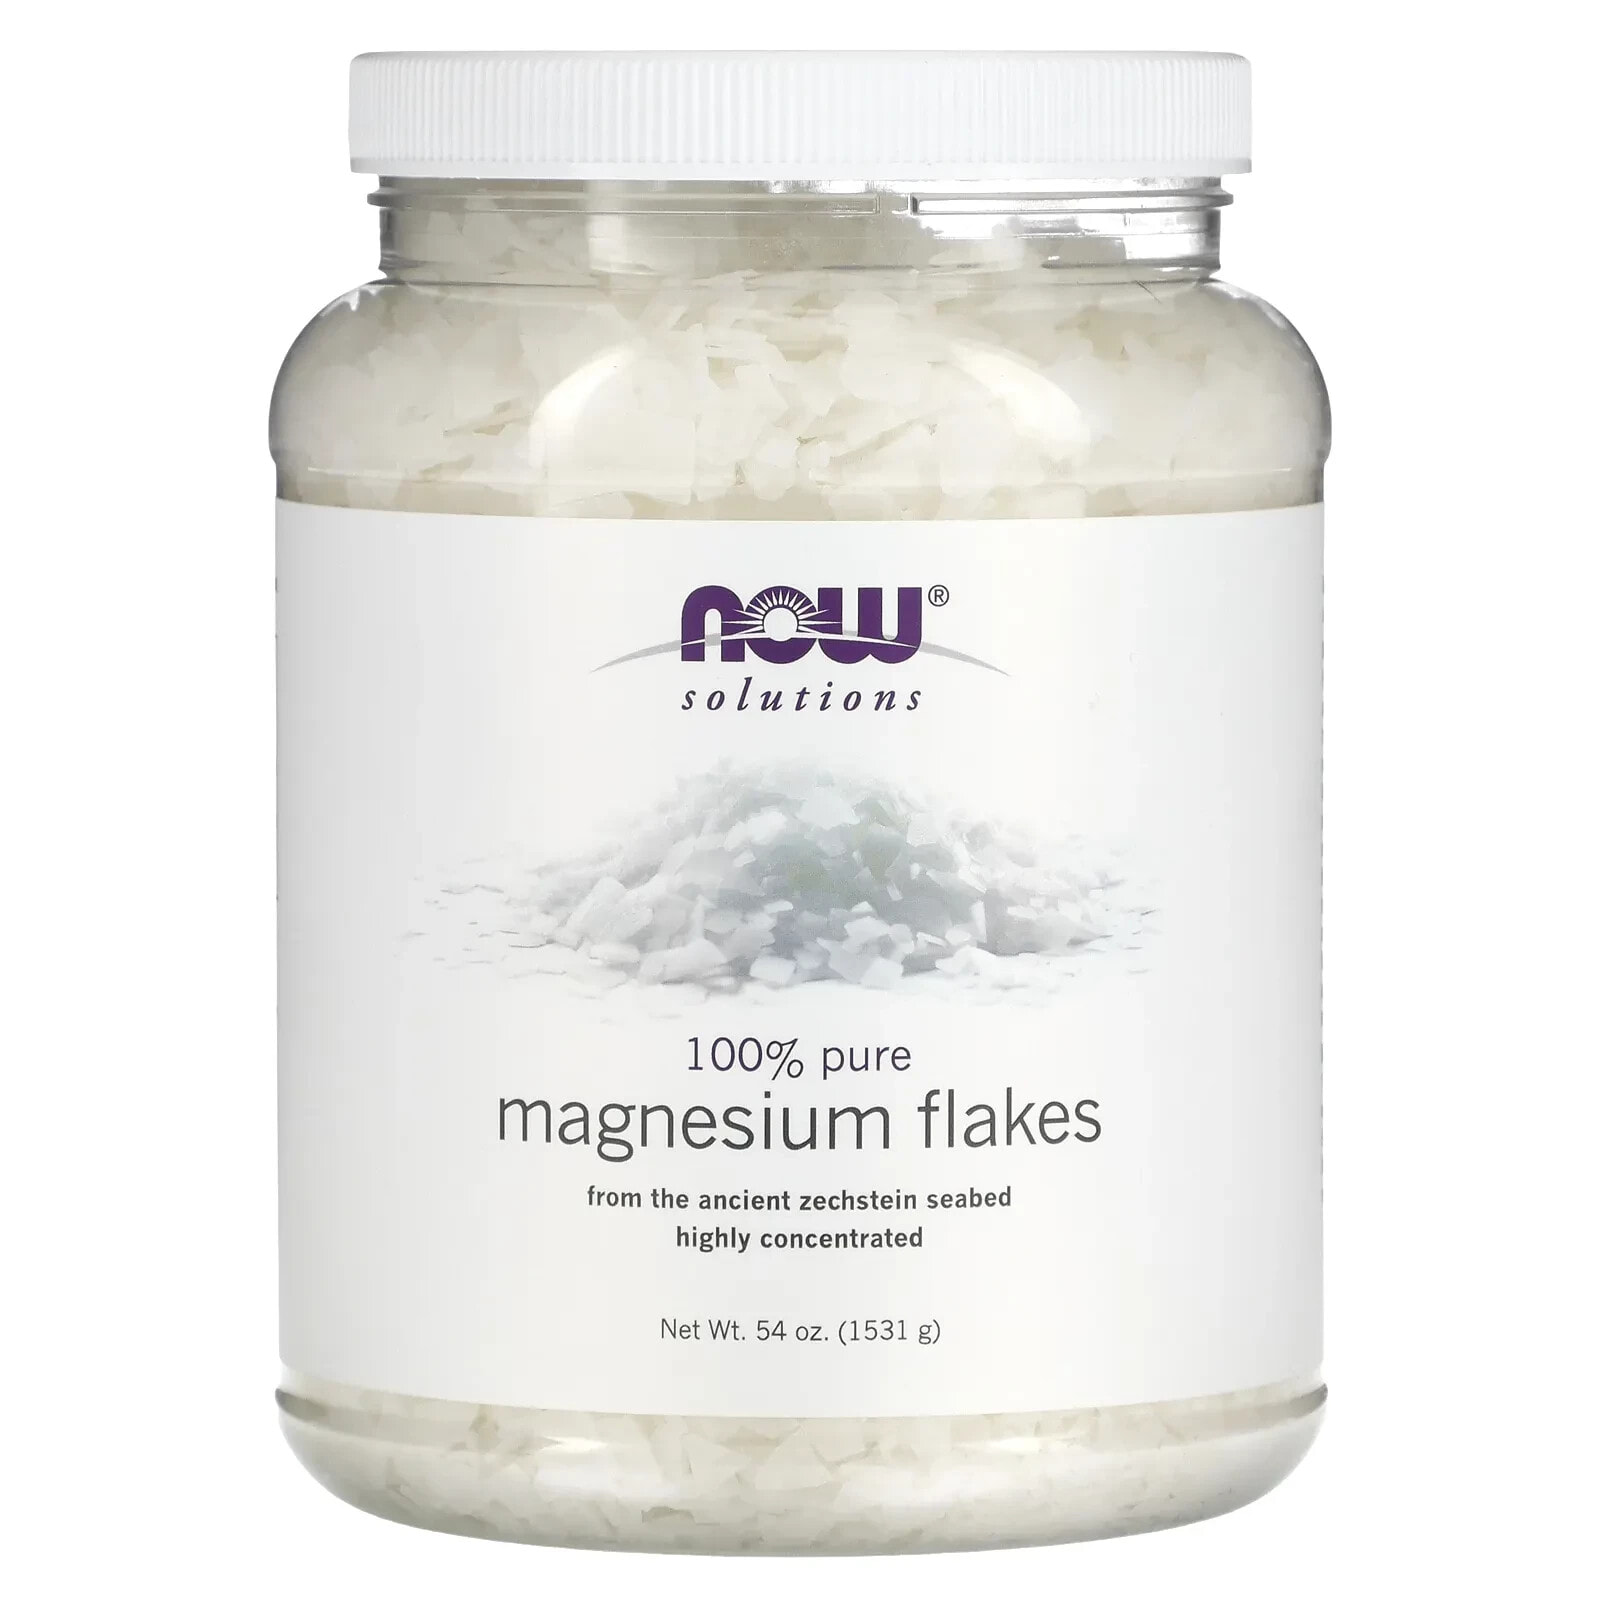 Solutions, Magnesium Flakes, 100% Pure, 54 oz (1531 g)